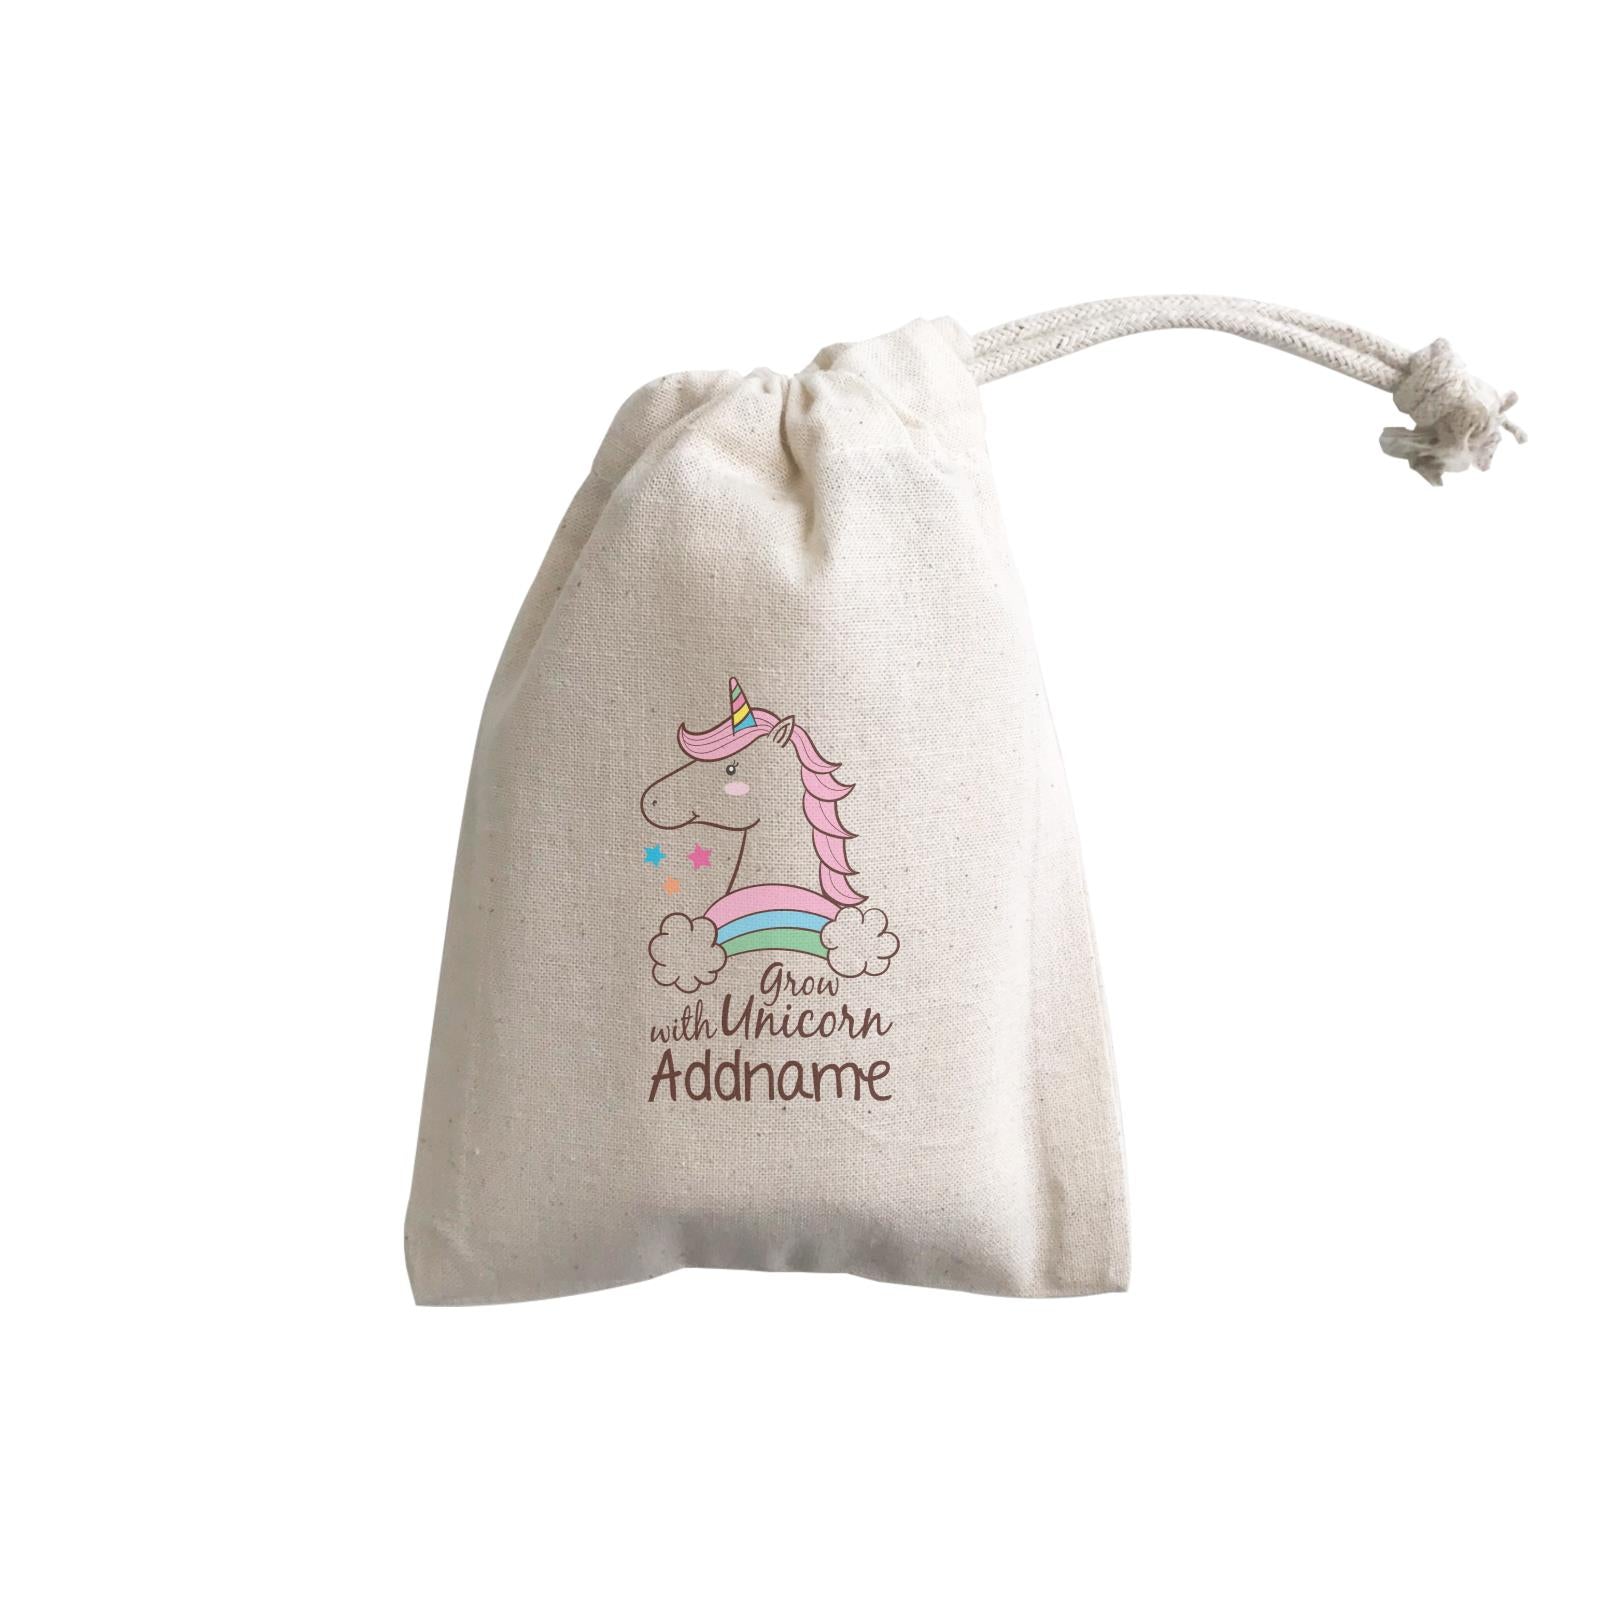 Cool Cute Unicorn Grow With Unicorn Addname GP Gift Pouch